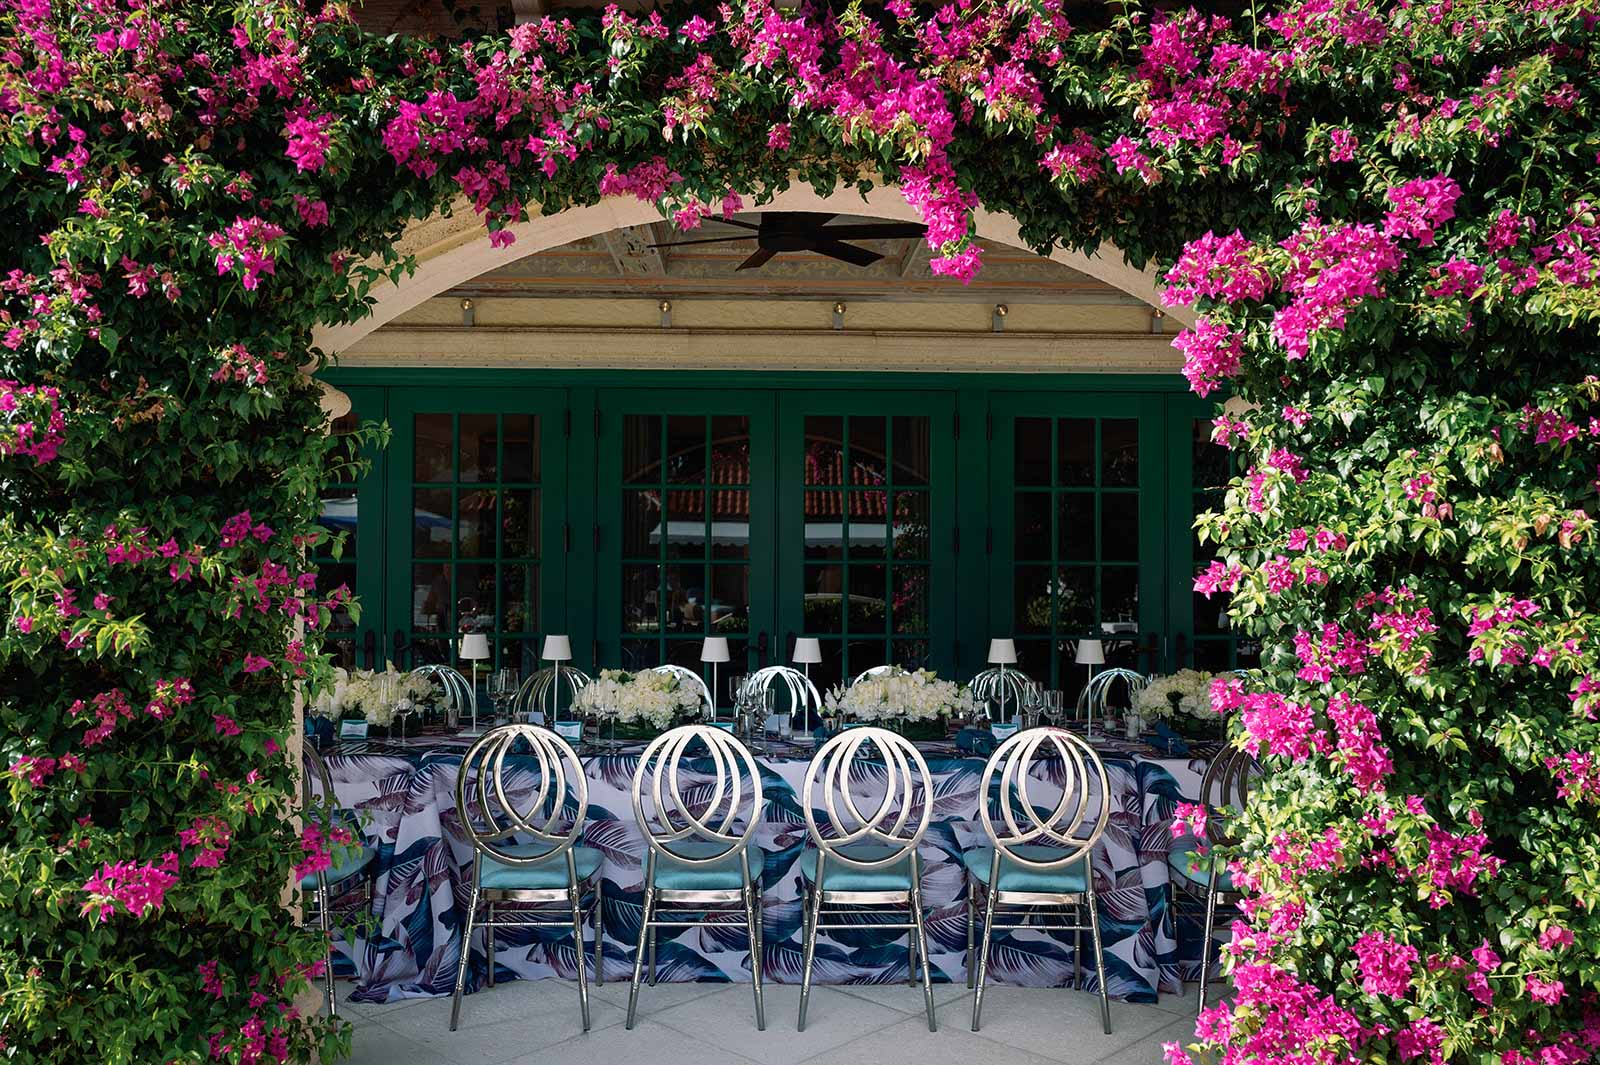 pink flower arch over a decorated table.